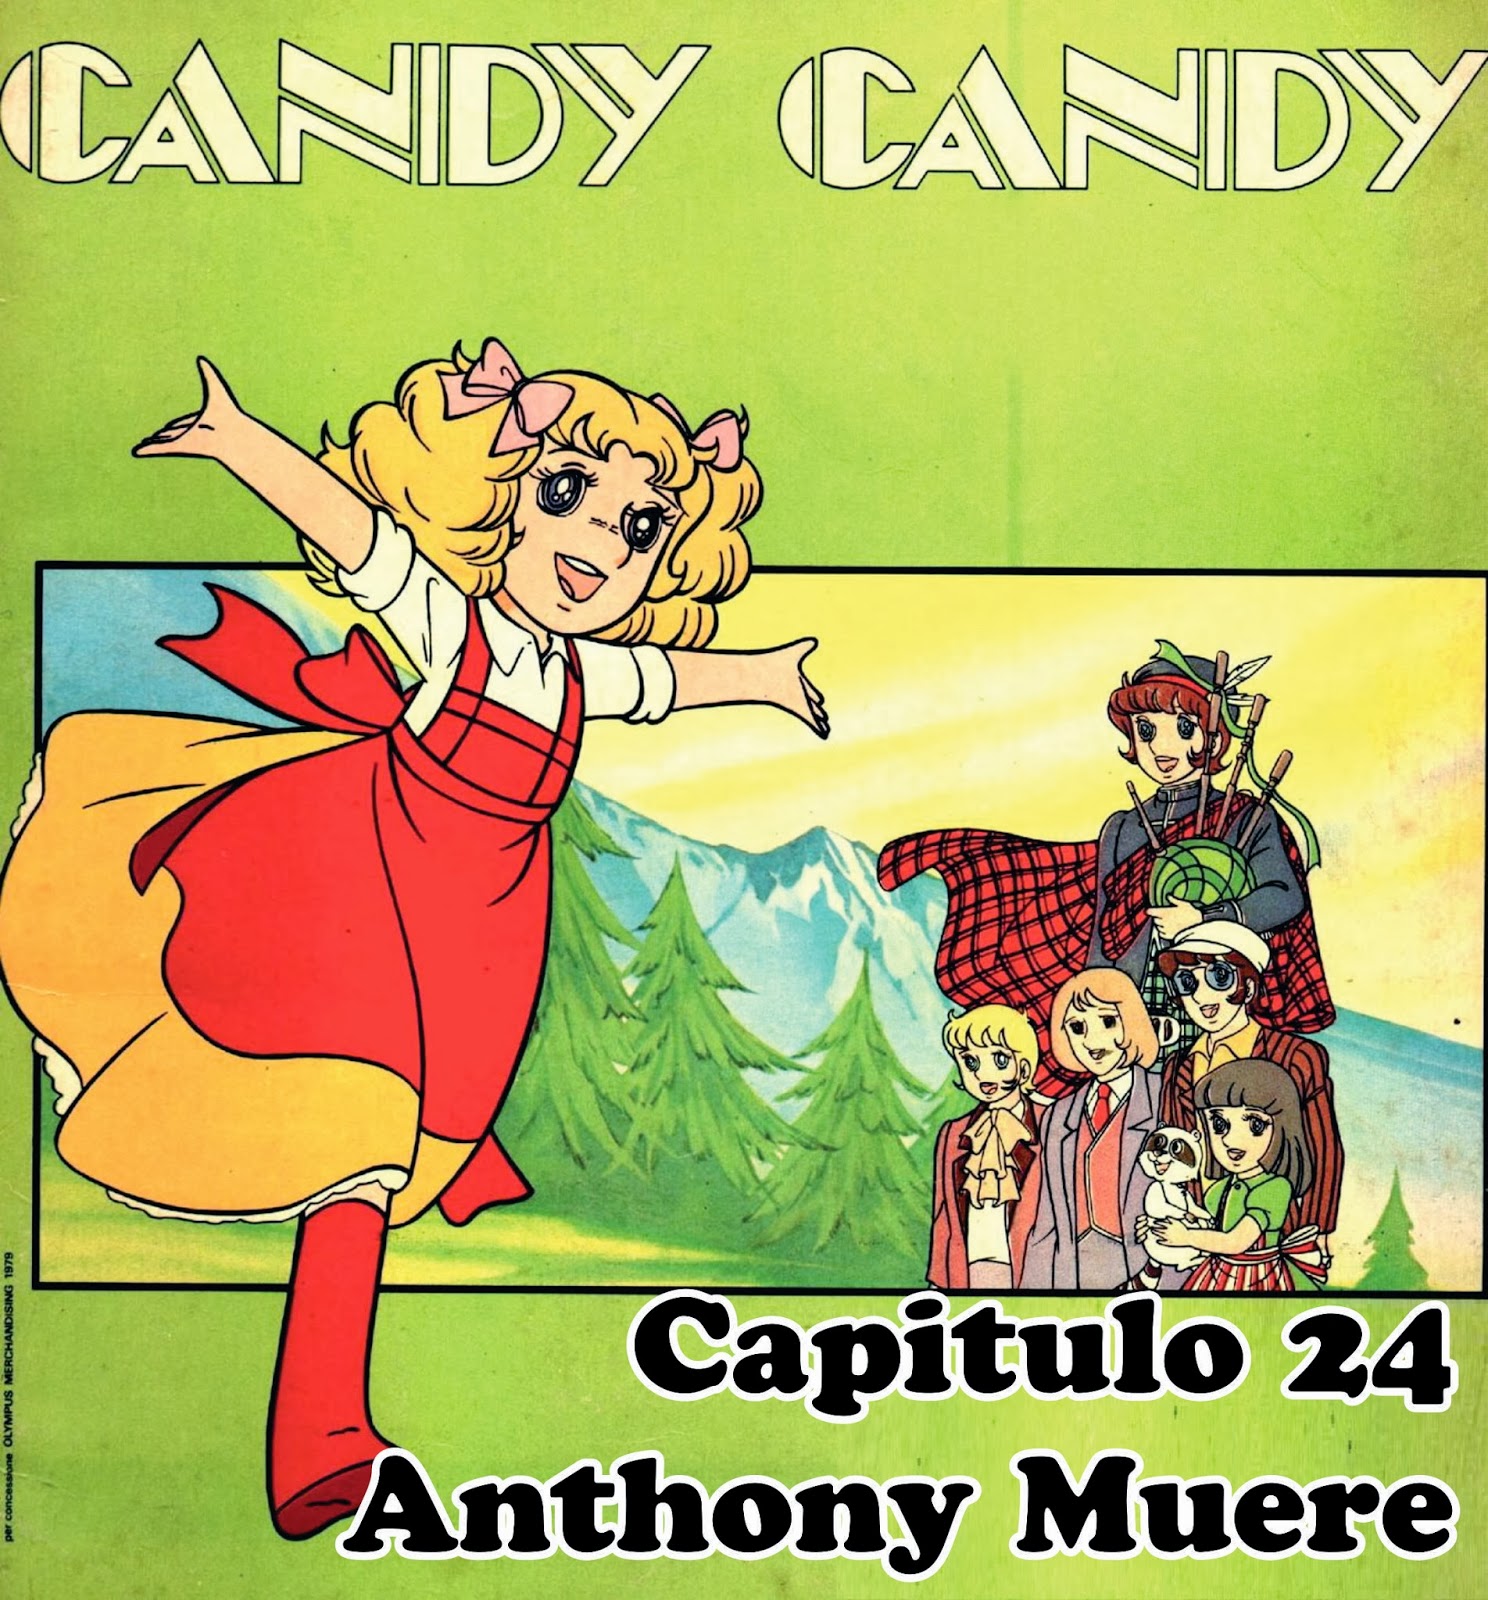 Descargas Gratis Candy Candy Capítulo 24 Anthony Muere